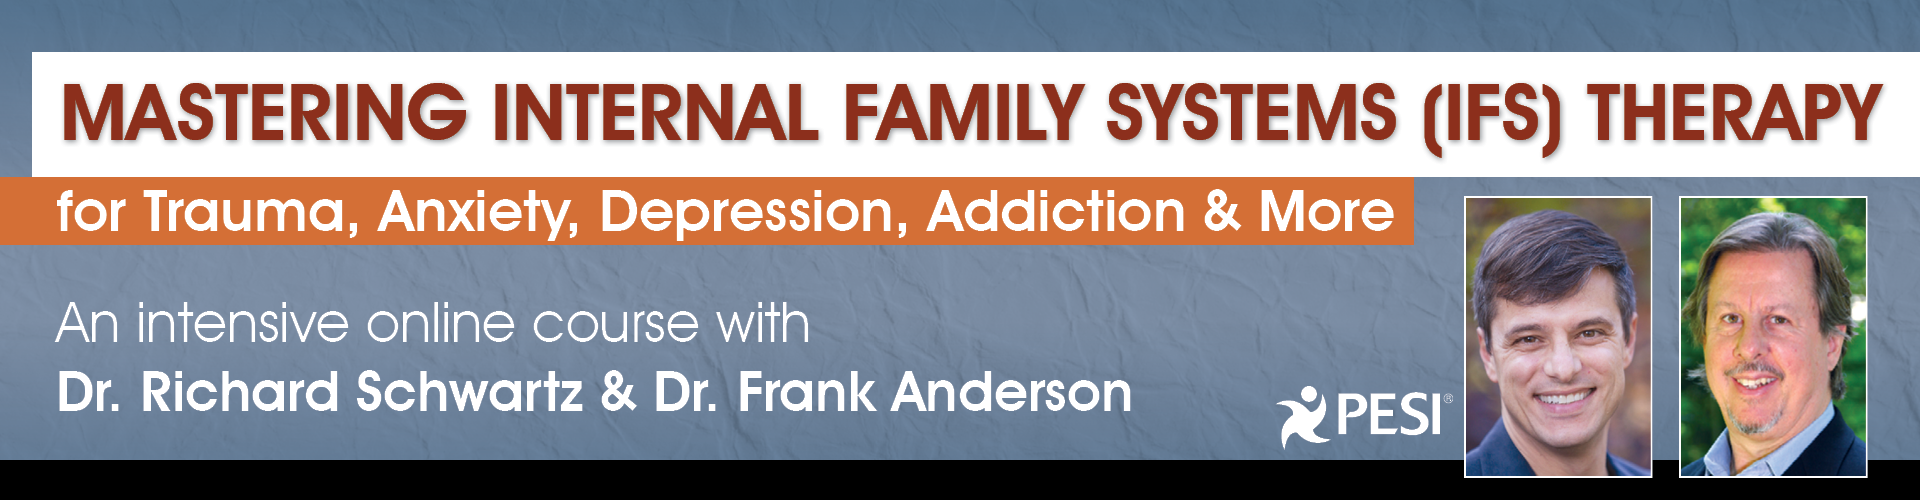 Mastering Internal Family Systems (IFS) Therapy for Trauma, Anxiety, Depression, Addiction & More: An Intensive Online Course with Dr. Richard Schwartz & Dr. Frank Anderson